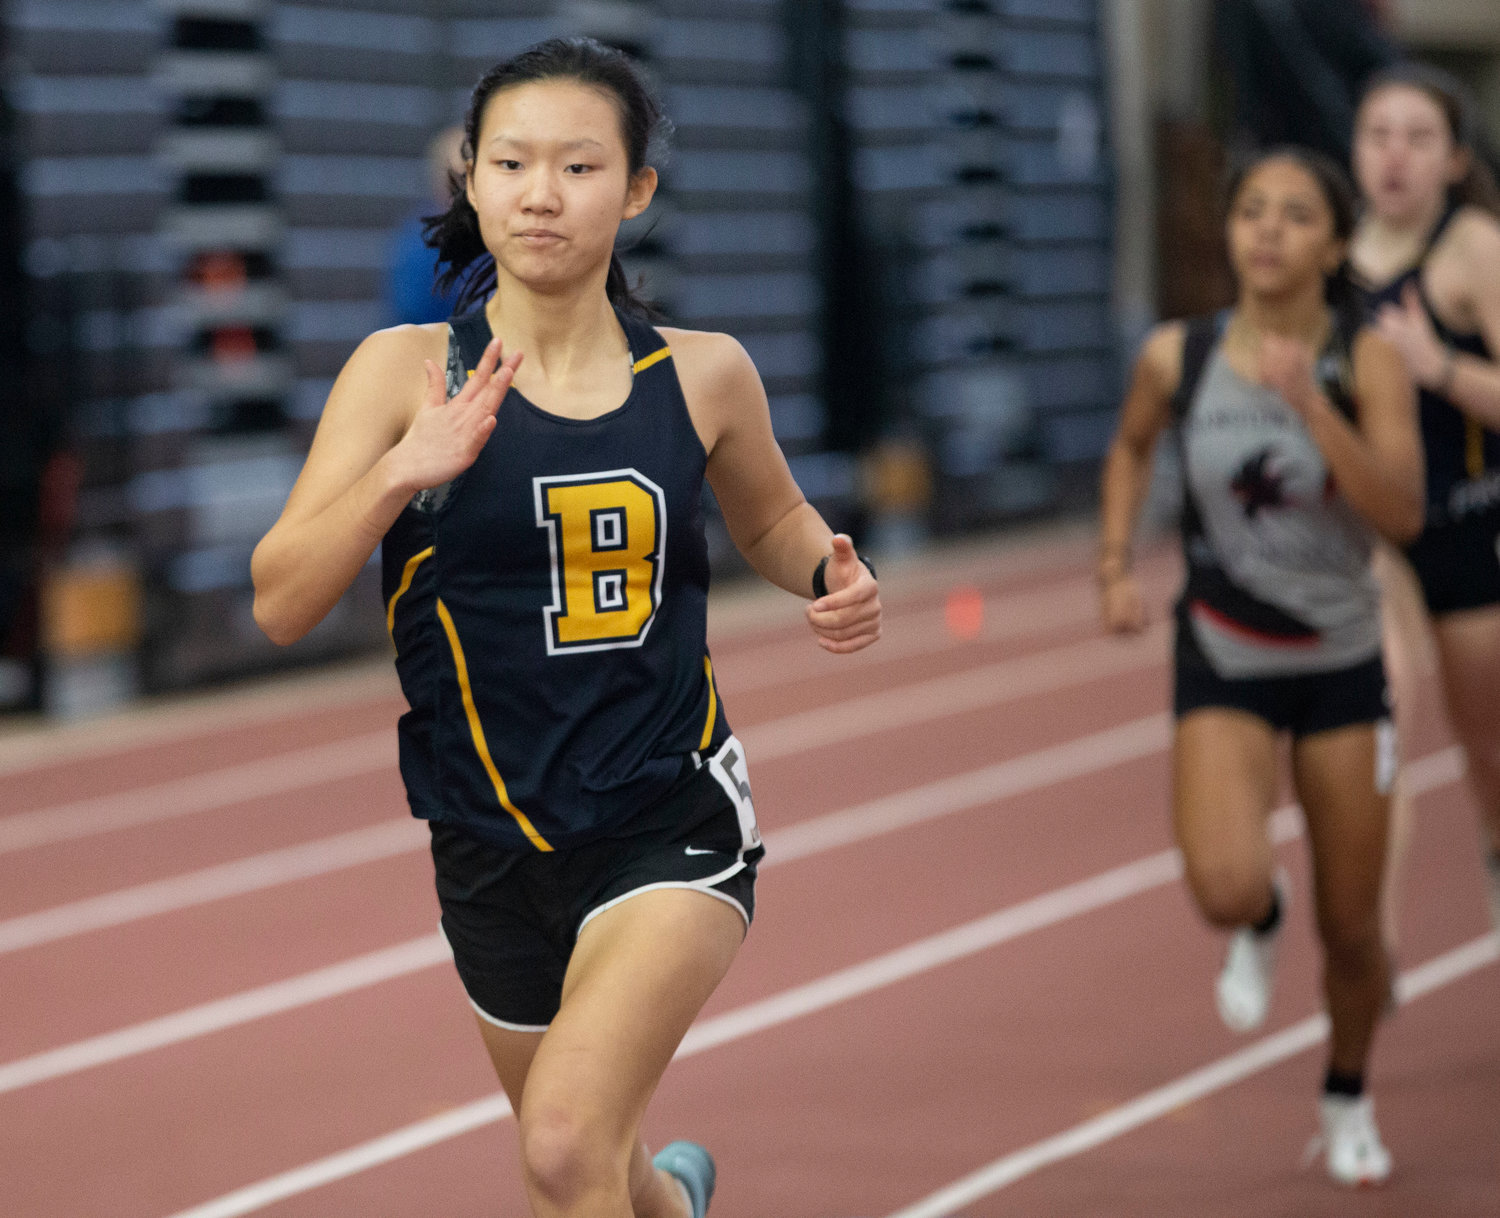 Indie Lamb places first in the 600-meter run during the Class Championships at the Providence Career and Technical Academy on Saturday.